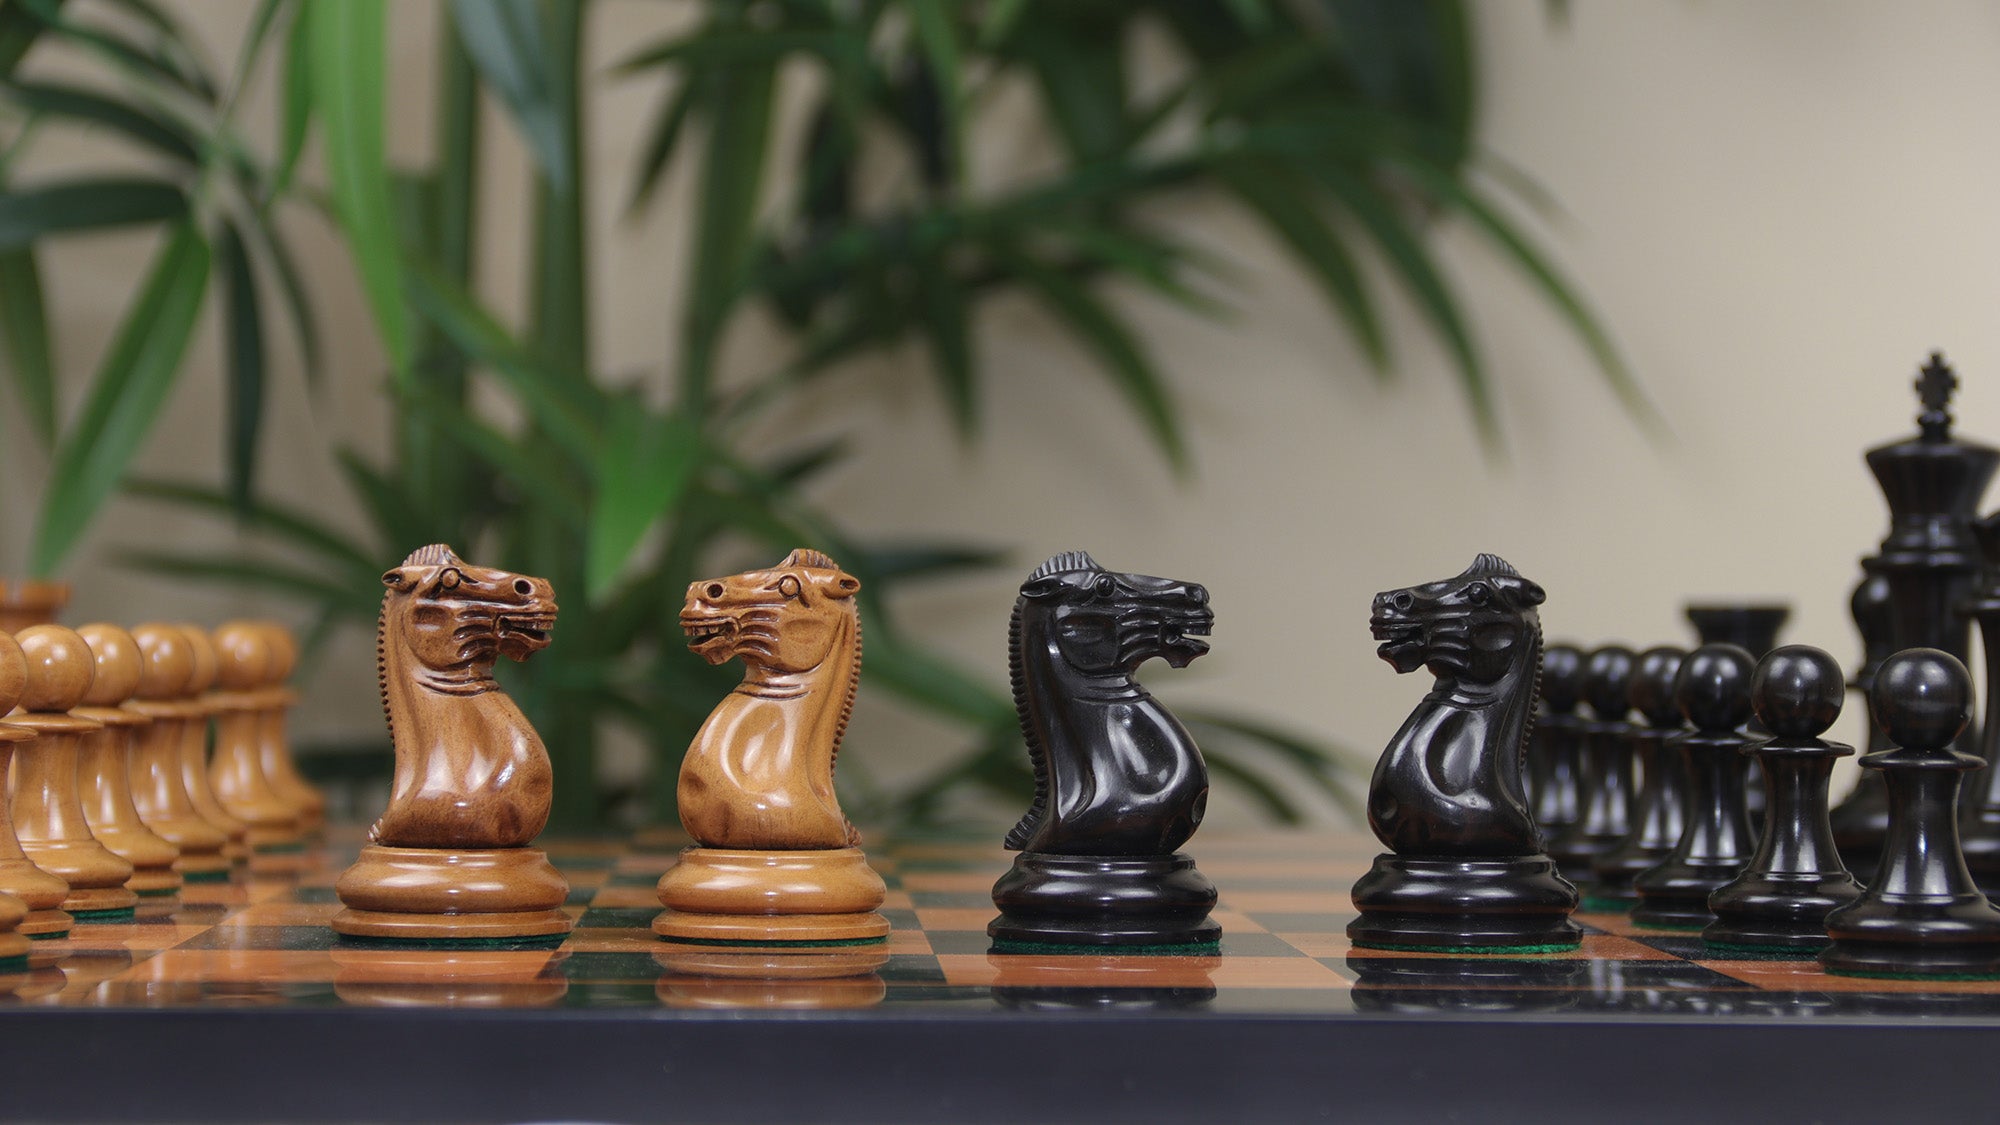 Original Reproduction Nathaniel 1849 Vintage 4.4" Chess Pieces in Distressed Boxwood & Ebony